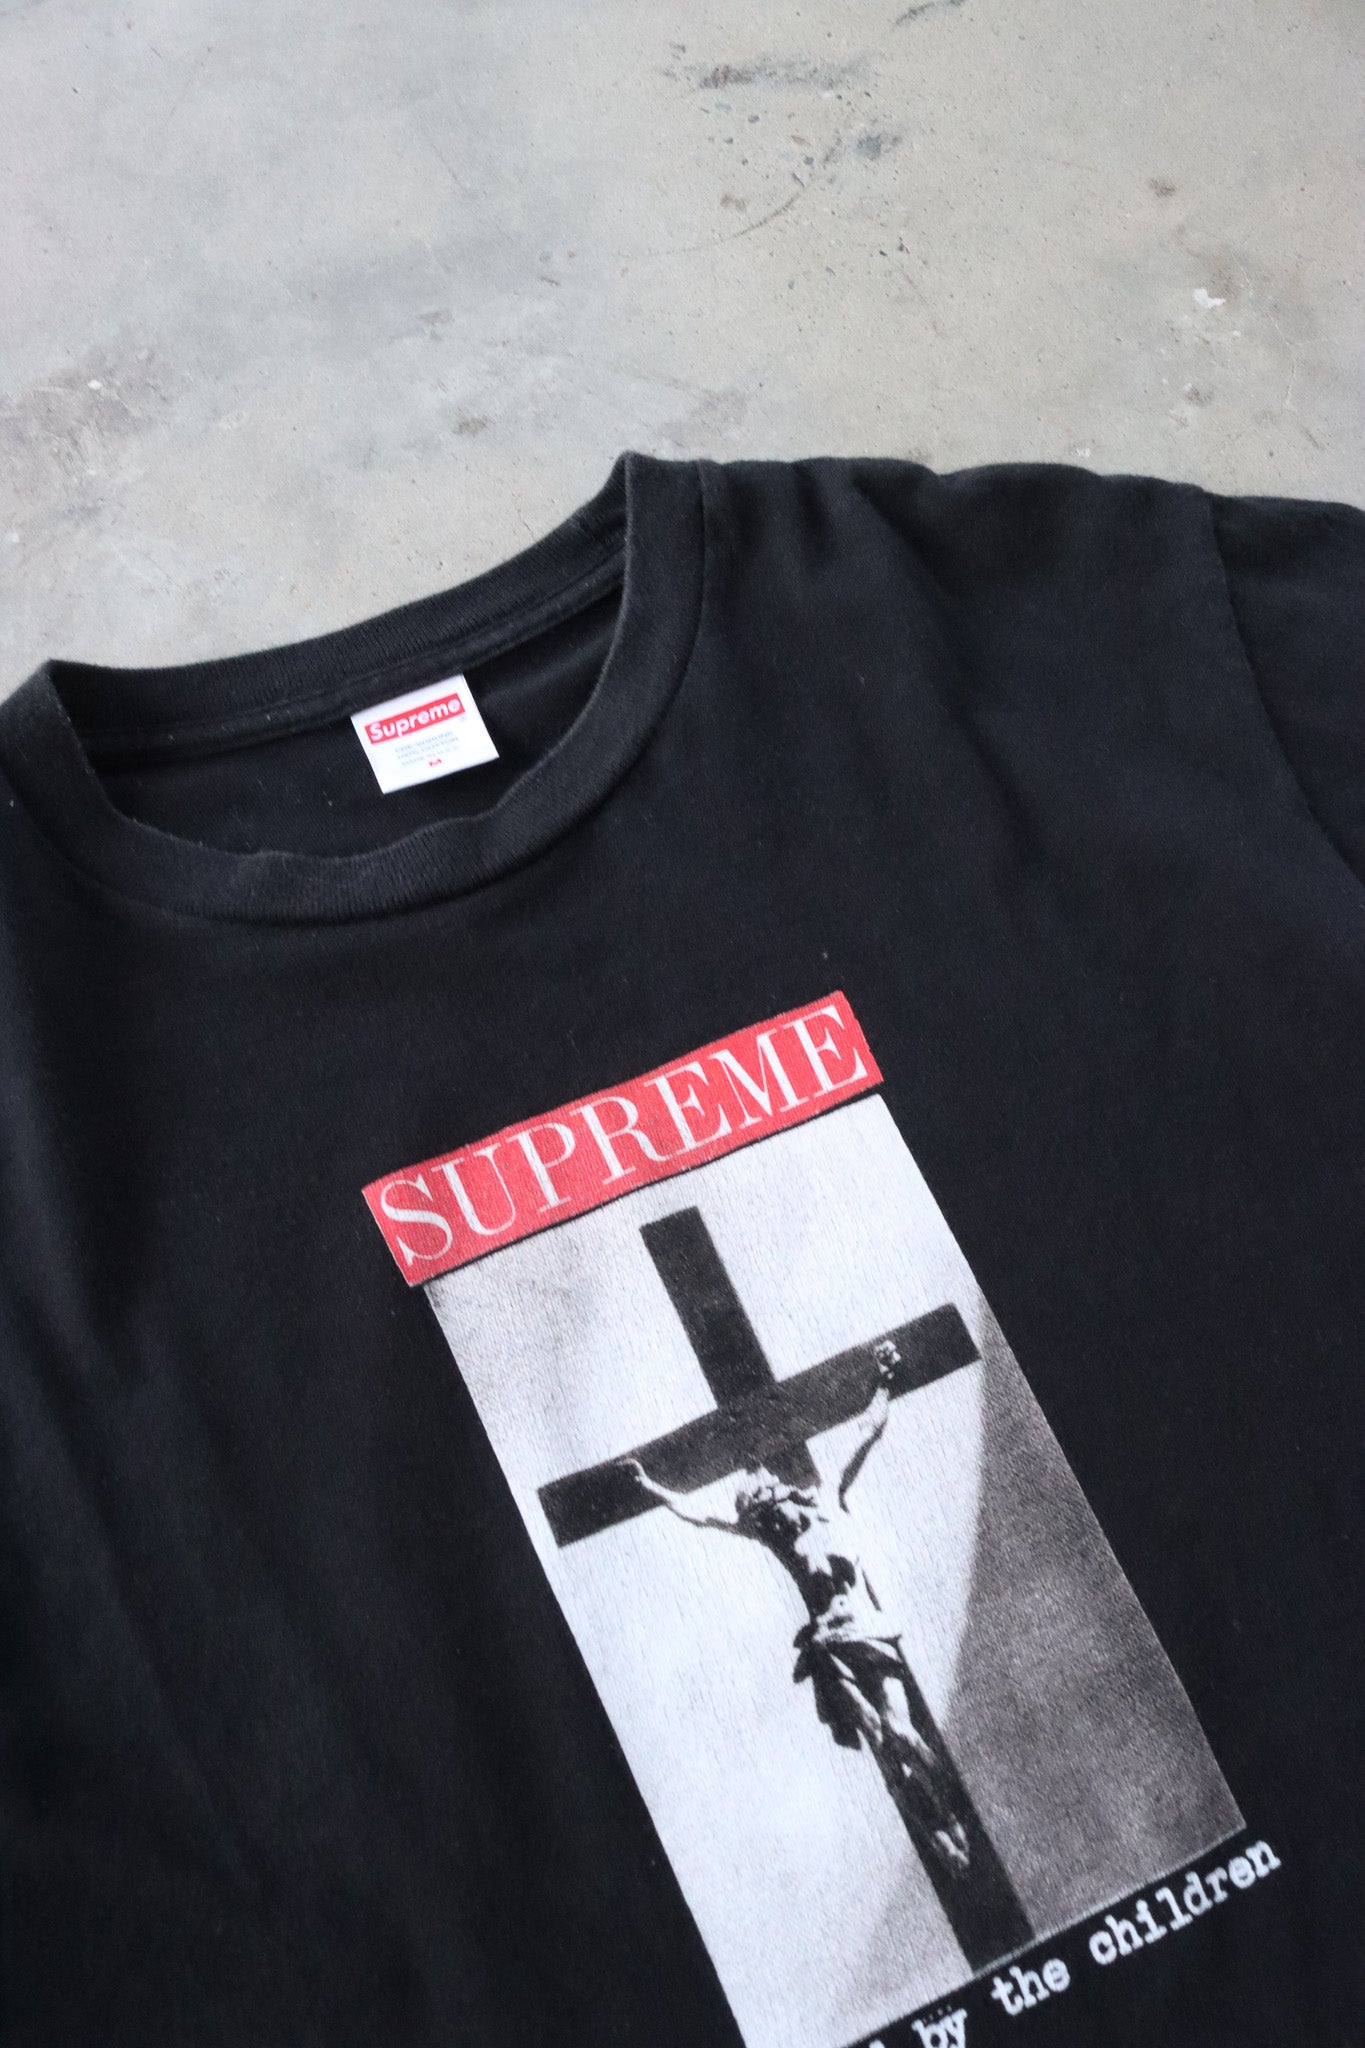 Supreme Loved By The Children Tee Black